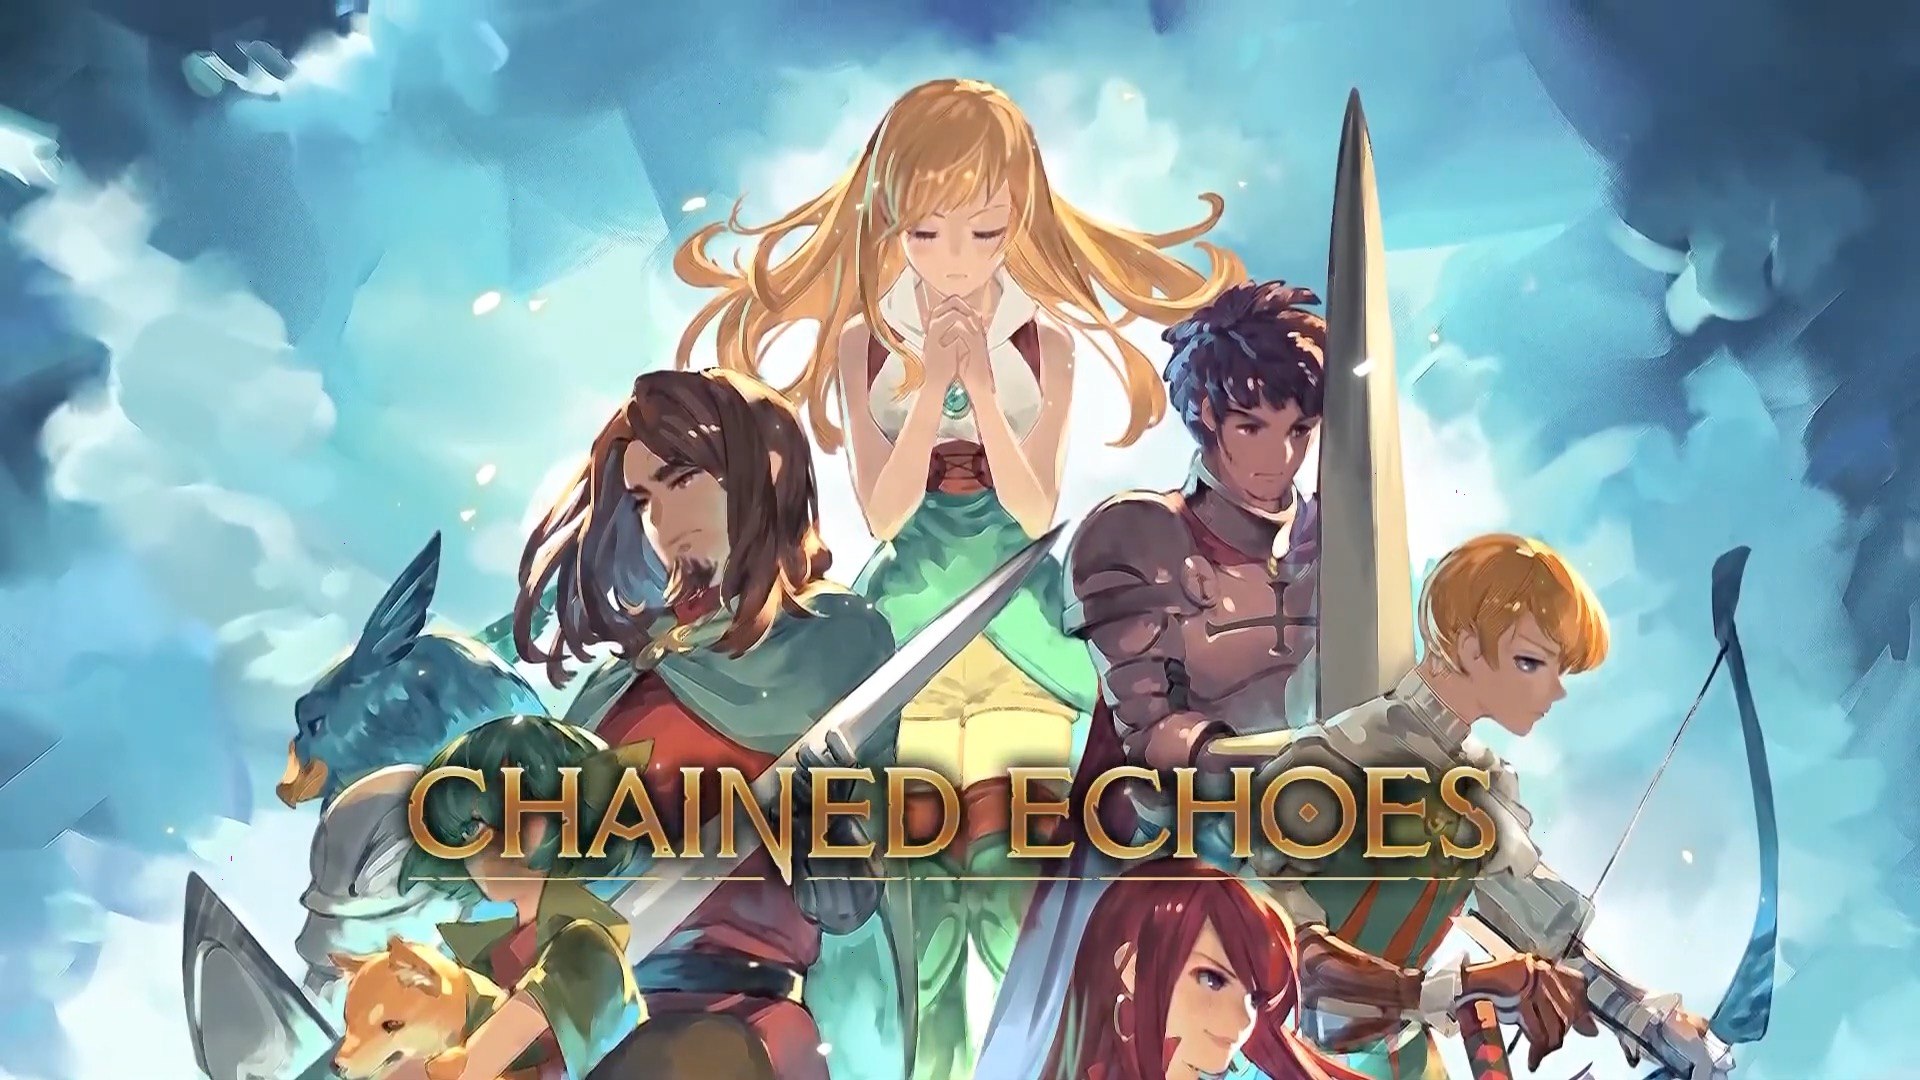 Chained Echoes - Official Gameplay Trailer 